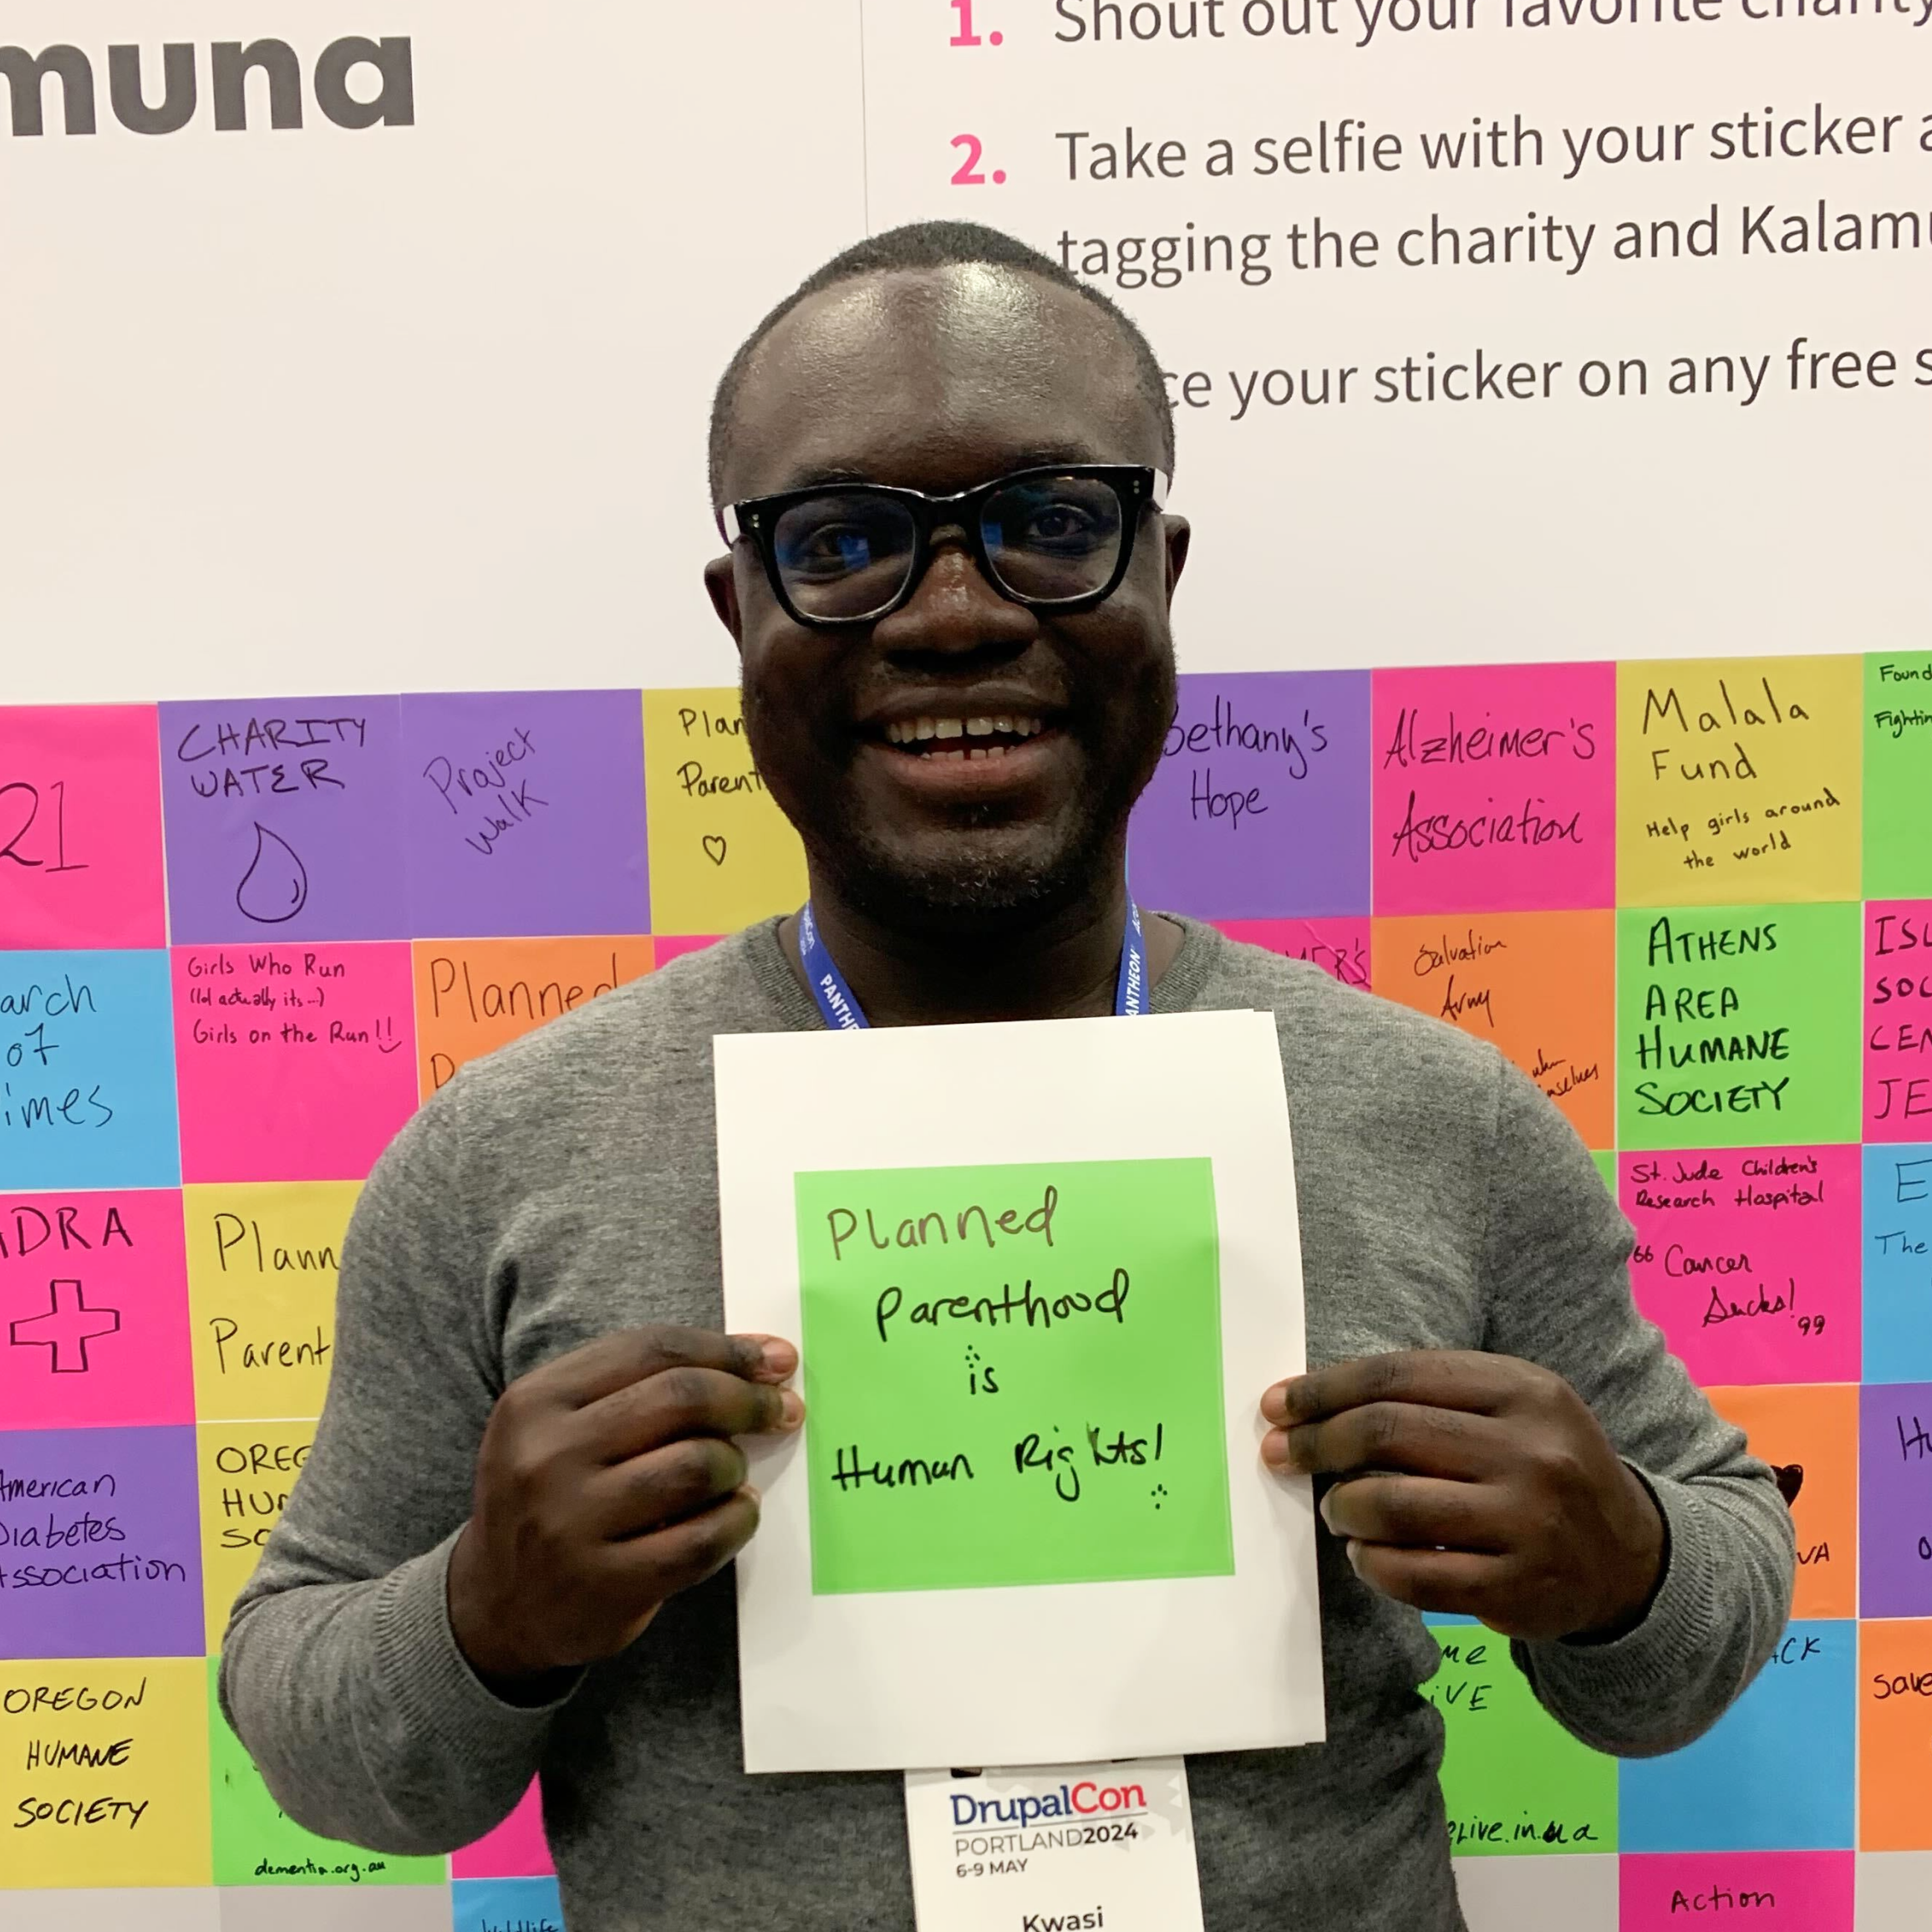 Kwasi Afreh holds a green square sticker with "Planned Parenthood is Human Rights!" written on it.